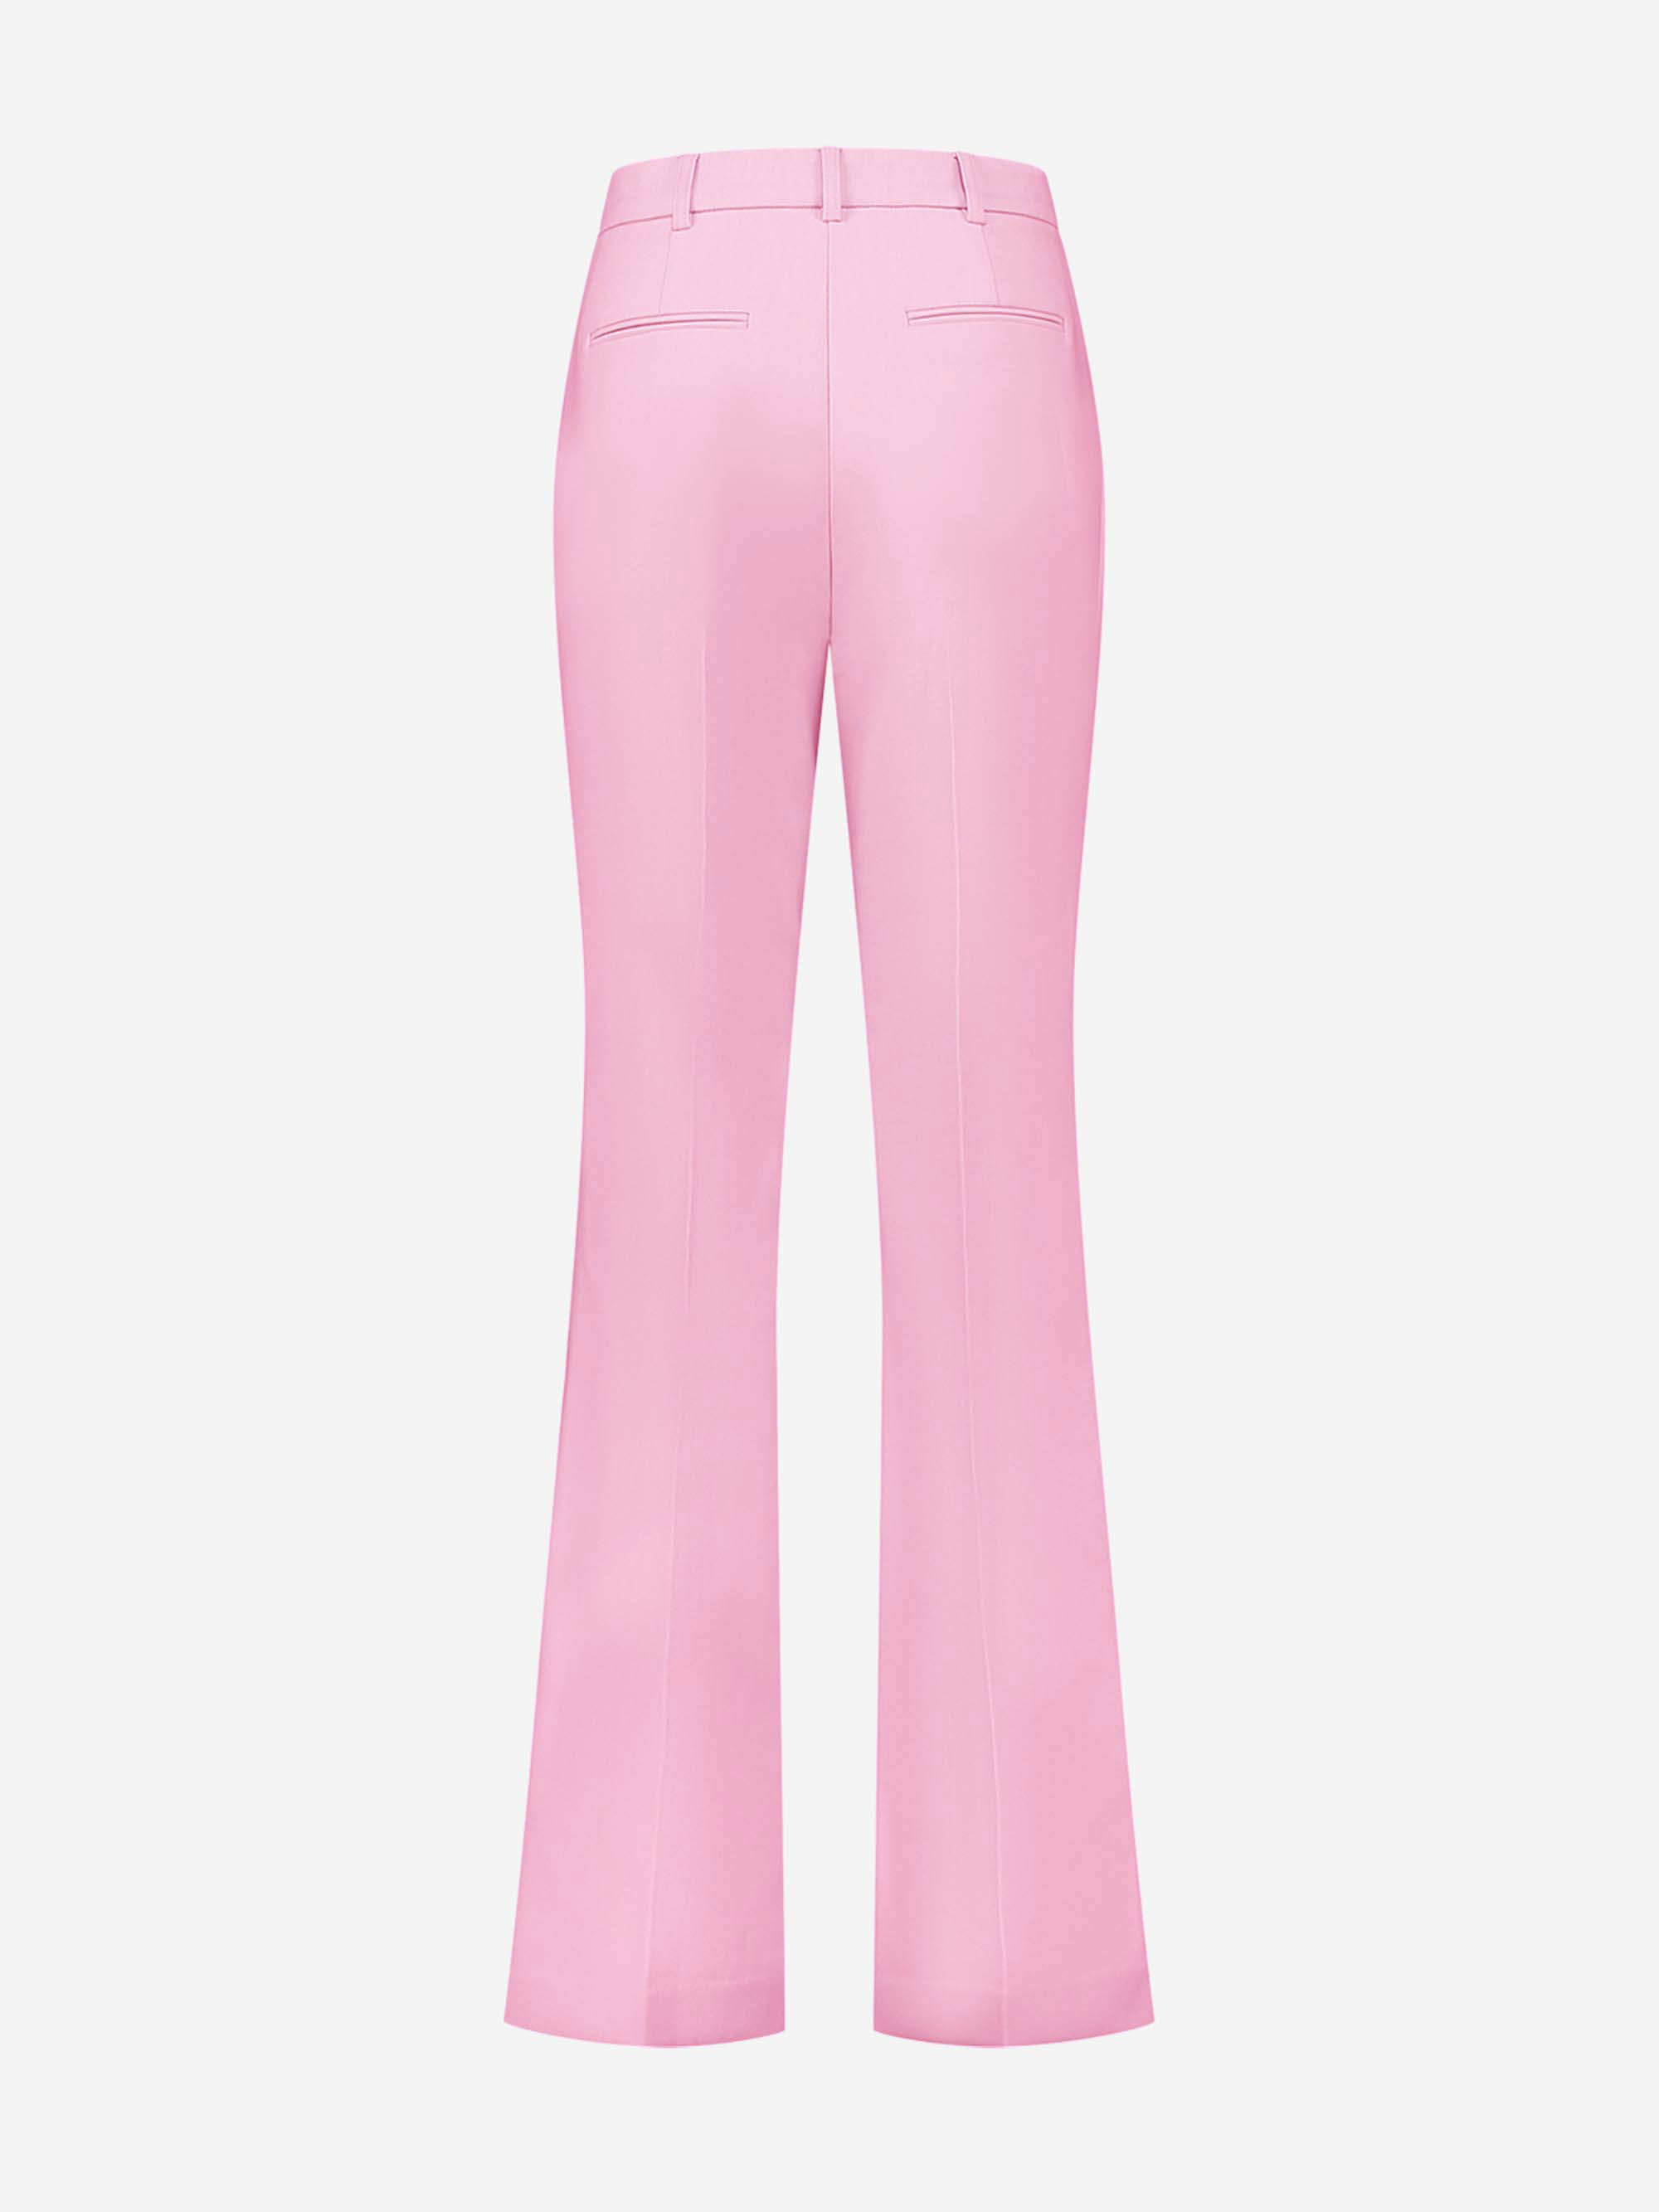 Flared trousers with high rise